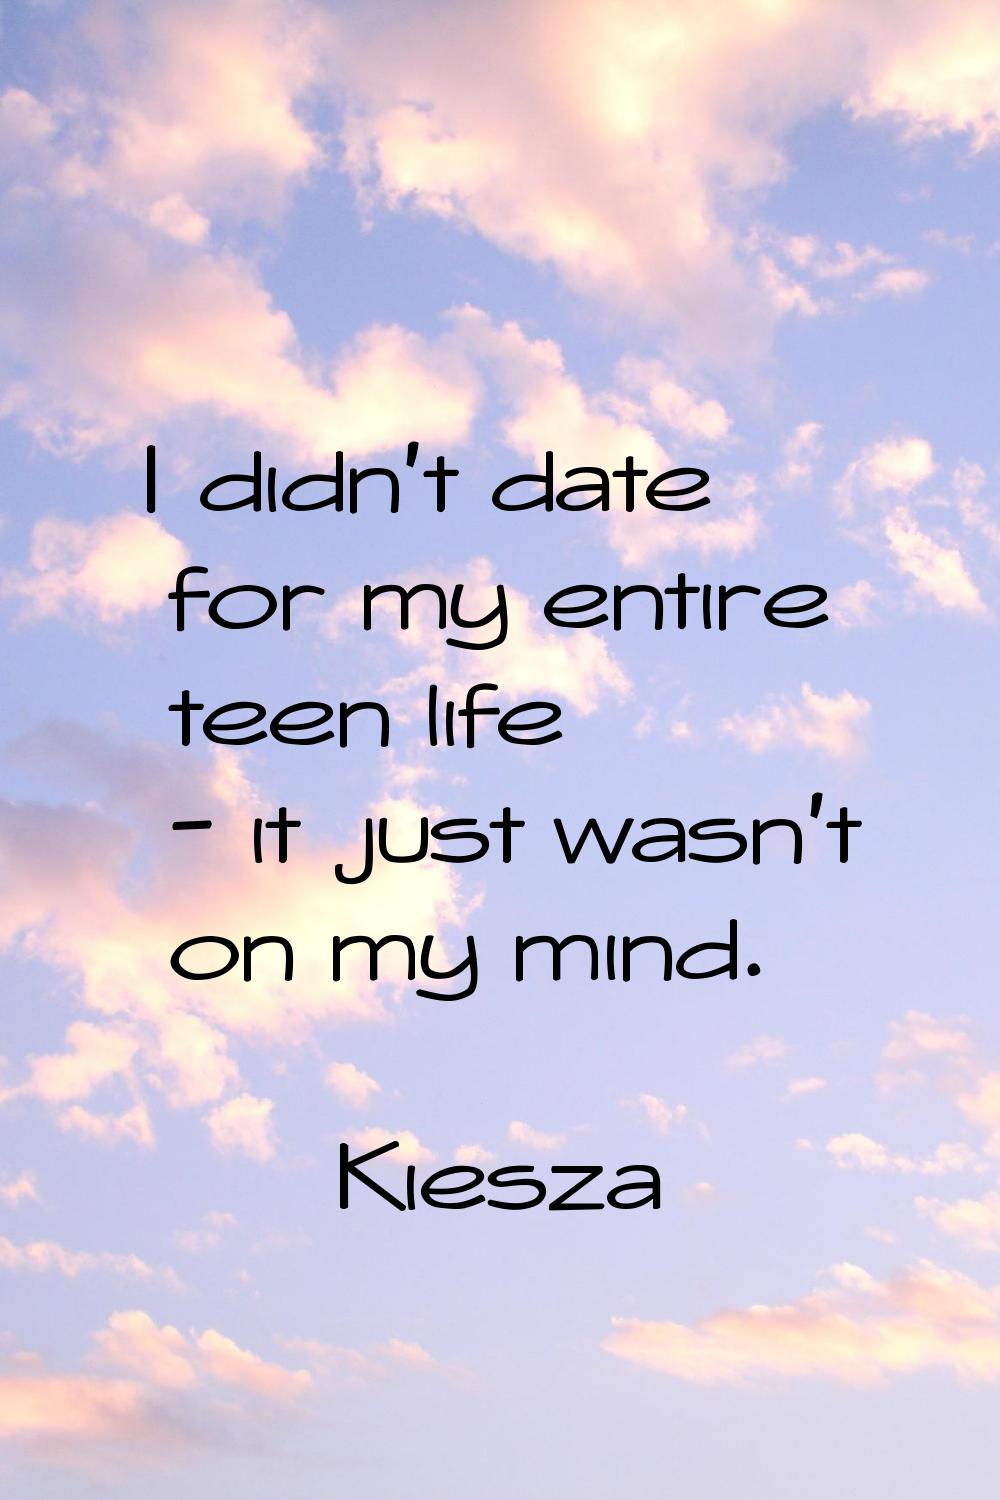 I didn't date for my entire teen life - it just wasn't on my mind.